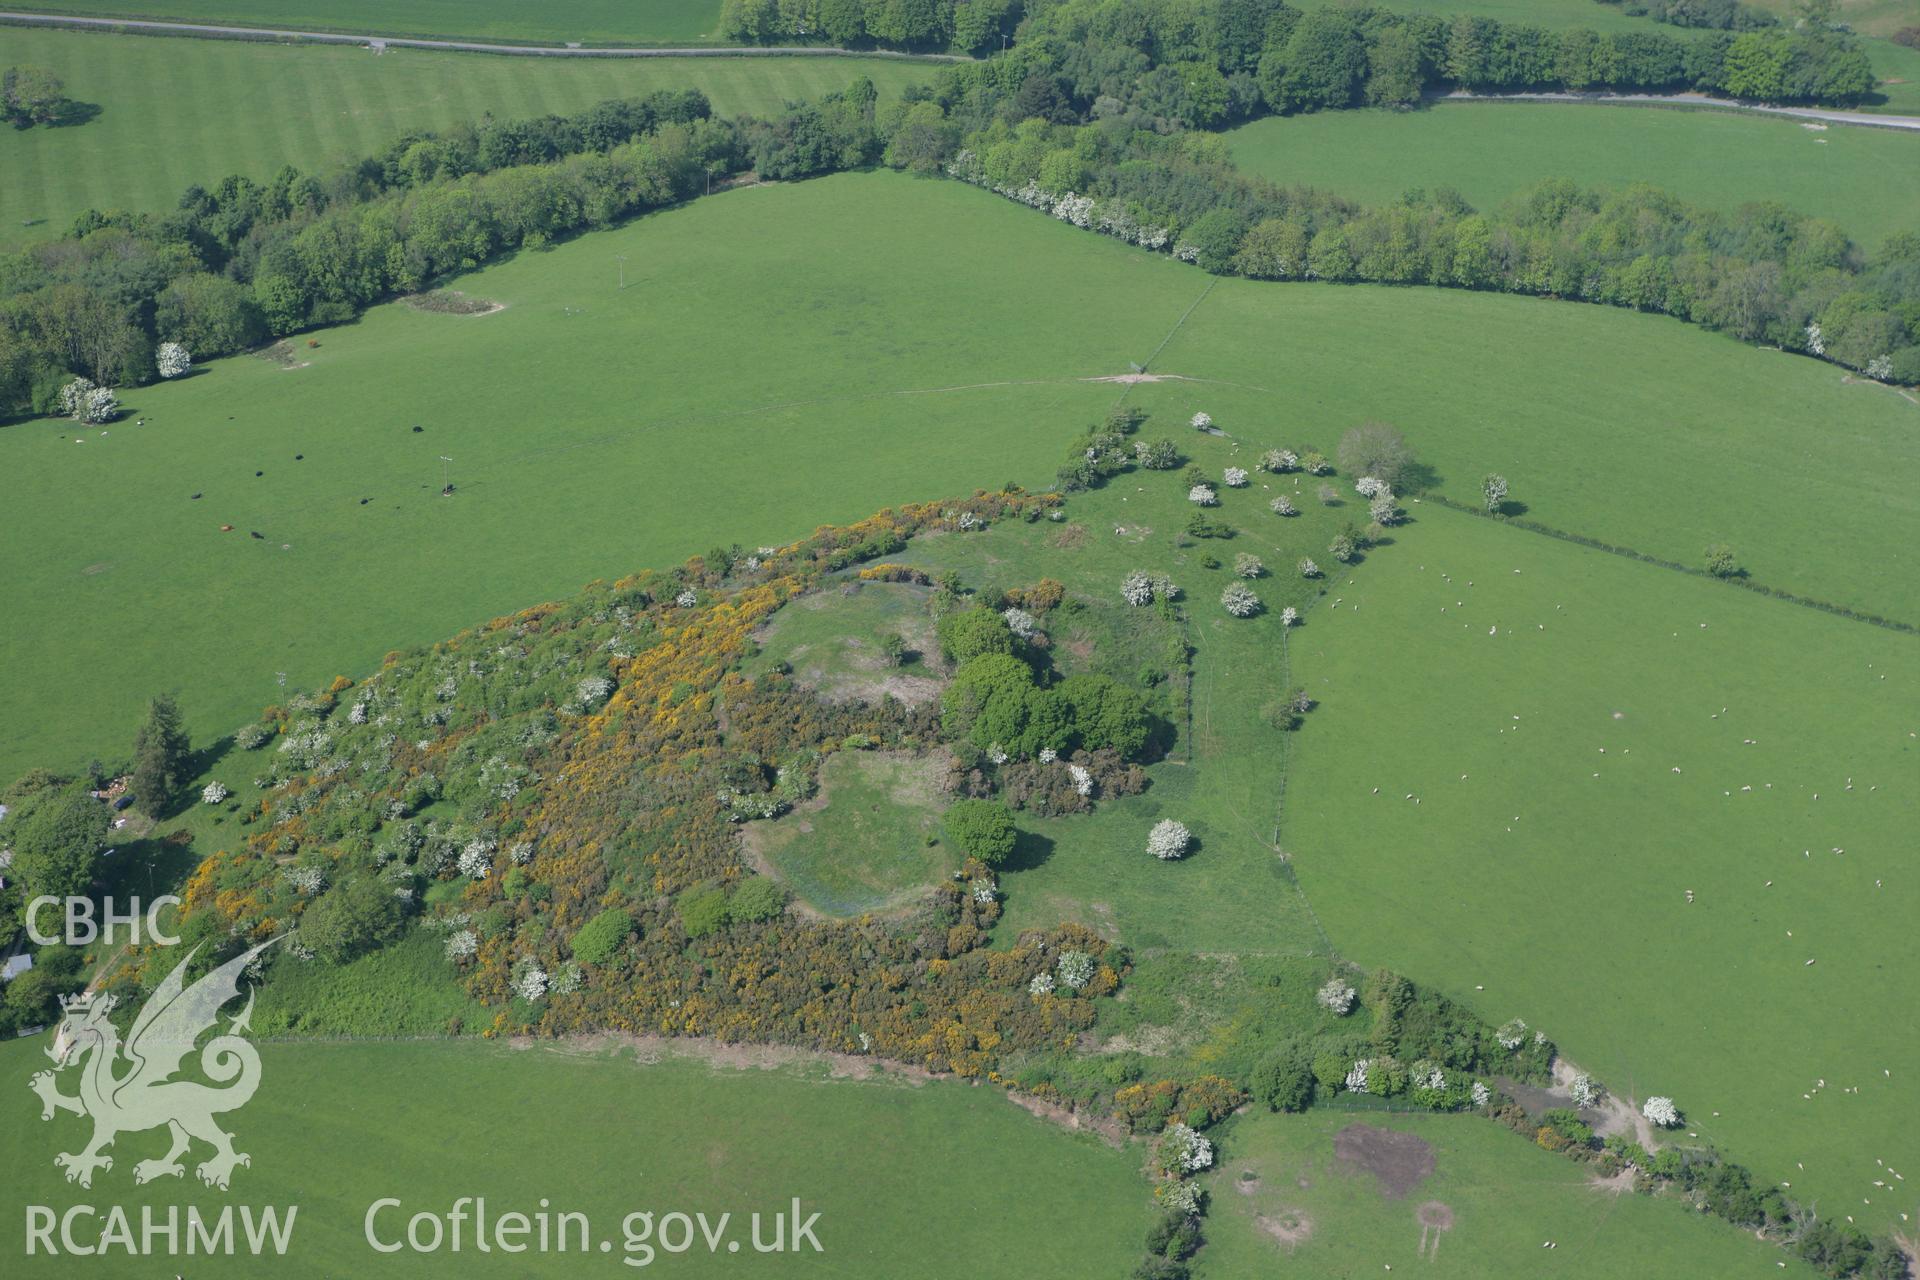 RCAHMW colour oblique photograph of Pen y Castell hillfort. Taken by Toby Driver on 25/05/2010.